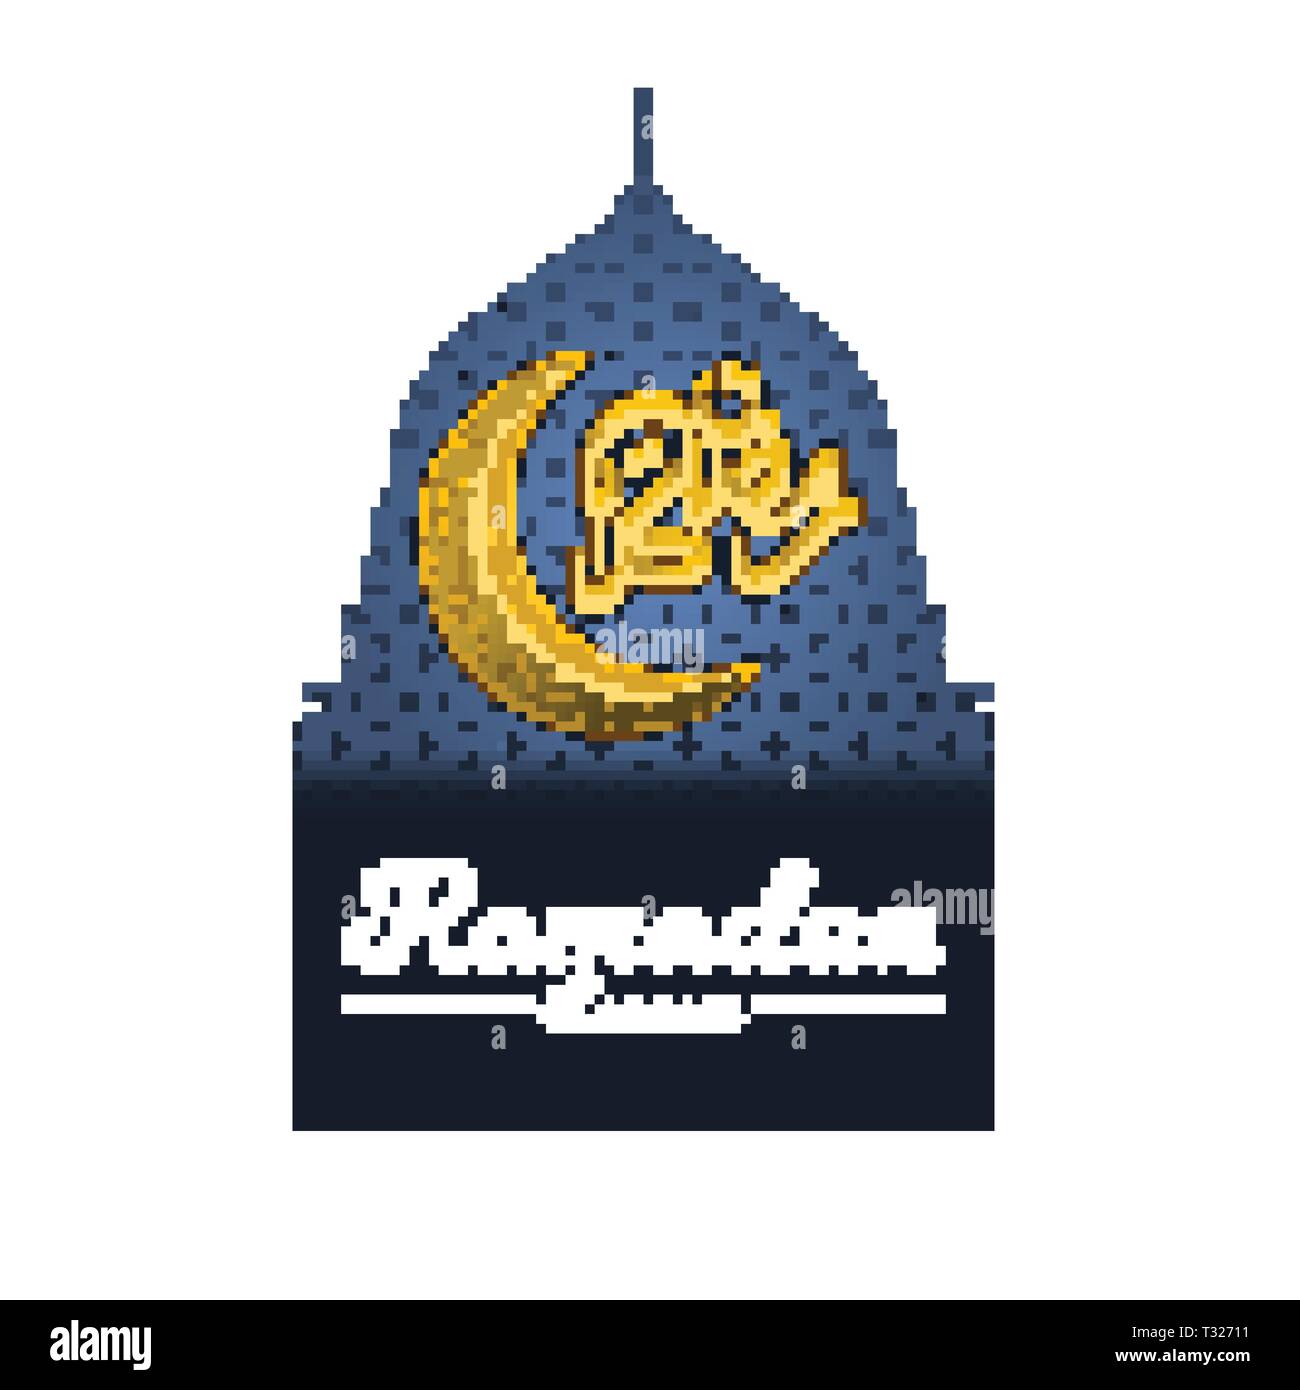 Islamic Greeting Card Design, Ramadan Kareem in Golden Arabic Calligraphy with Crescent Moon, Clipping Mask with Prophet Mosque. Stock Vector